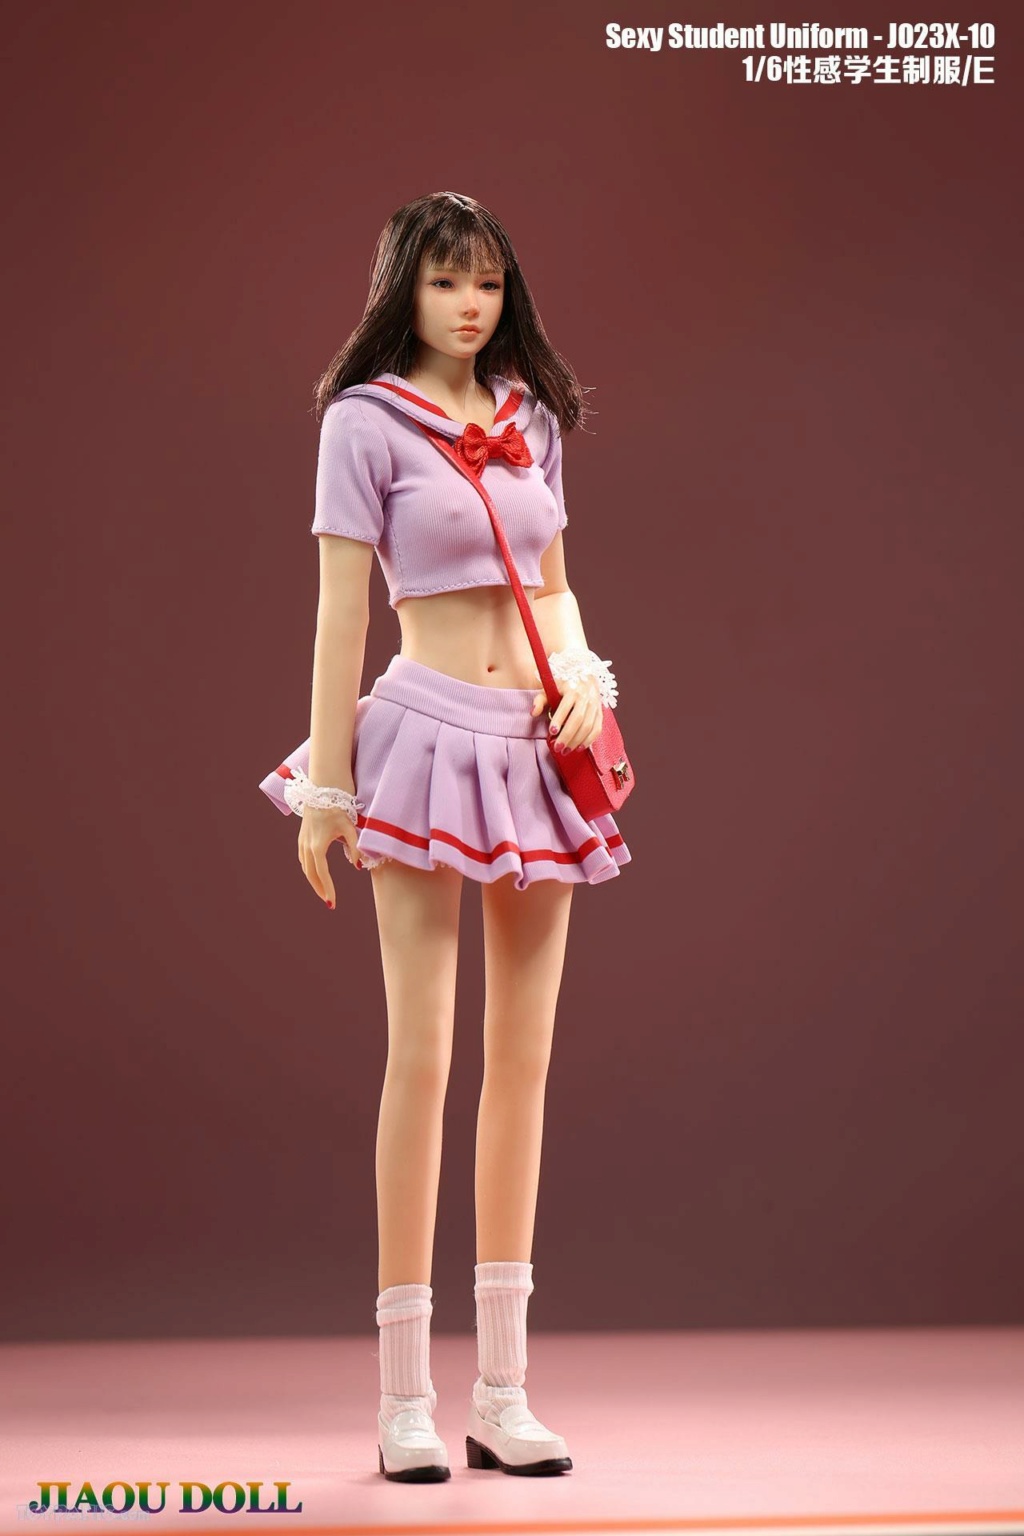 female - NEW PRODUCT: Jiaou Doll: 1/6 Sexy Student Uniform (7 color options) (JO23X-10A-G) (NSFW) 20920235